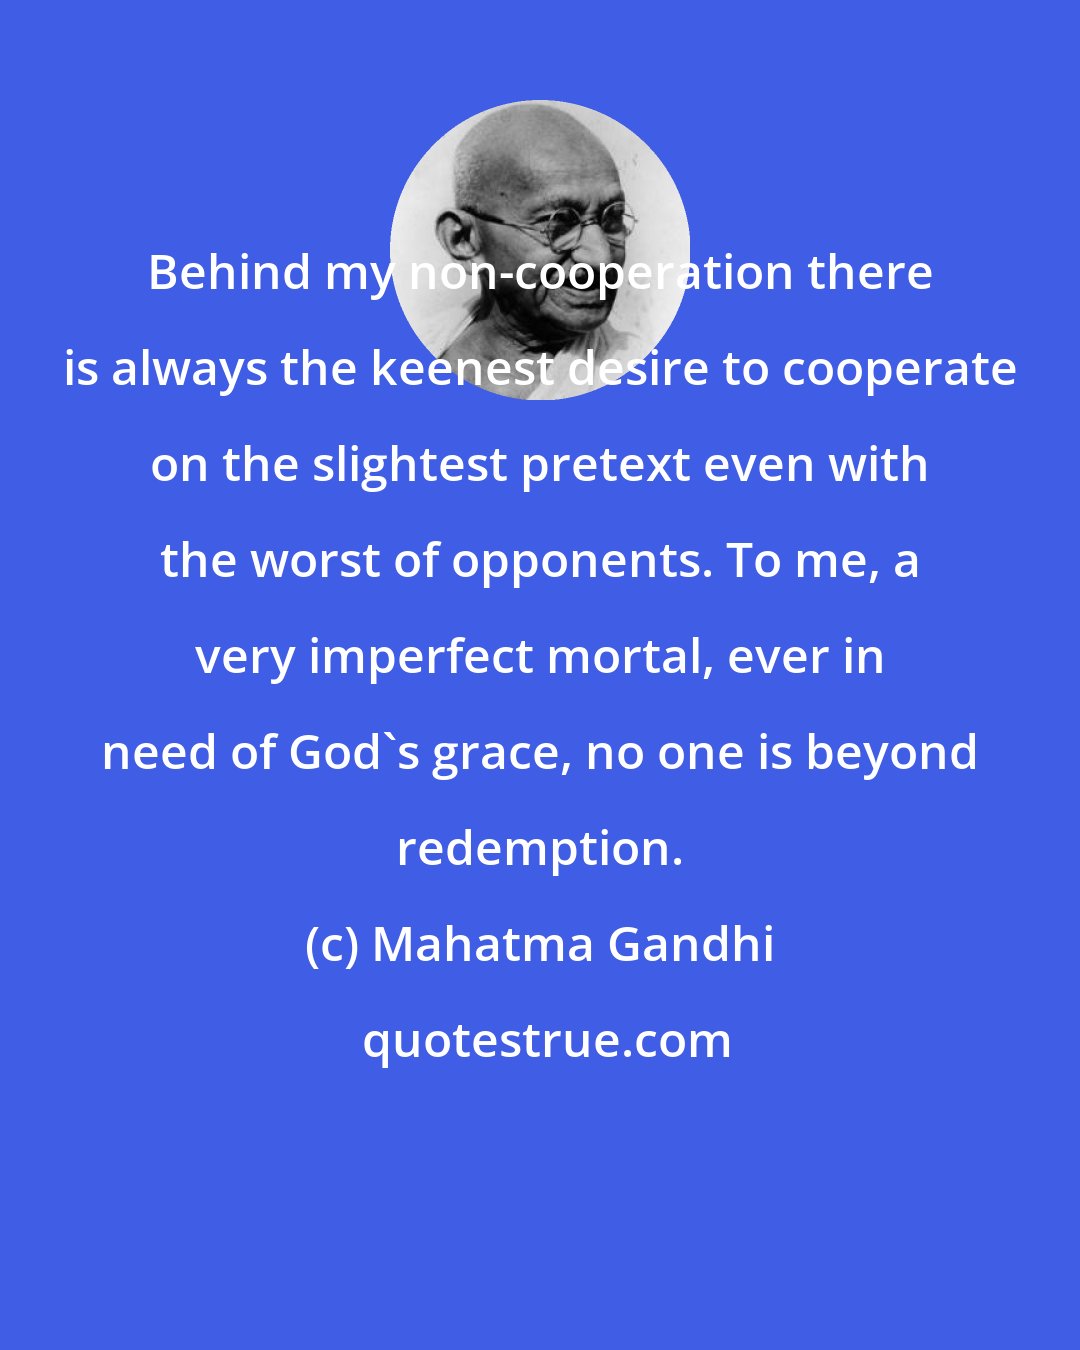 Mahatma Gandhi: Behind my non-cooperation there is always the keenest desire to cooperate on the slightest pretext even with the worst of opponents. To me, a very imperfect mortal, ever in need of God's grace, no one is beyond redemption.